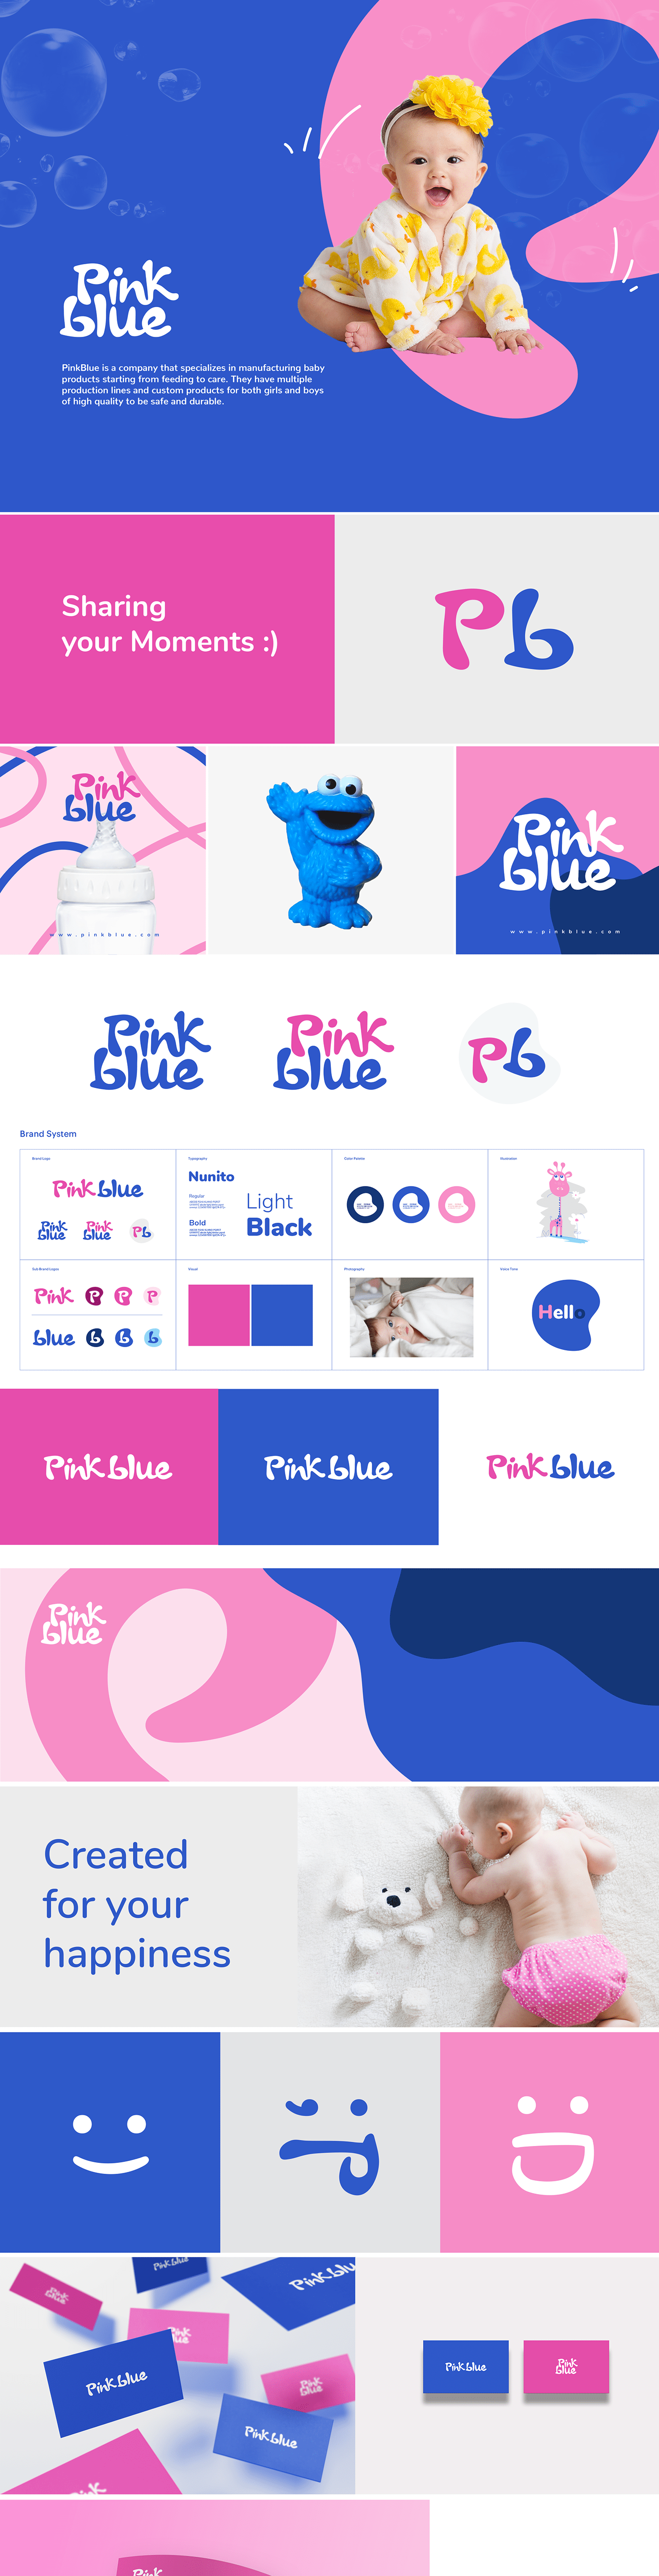 pink blue baby products care company mothers logo identity